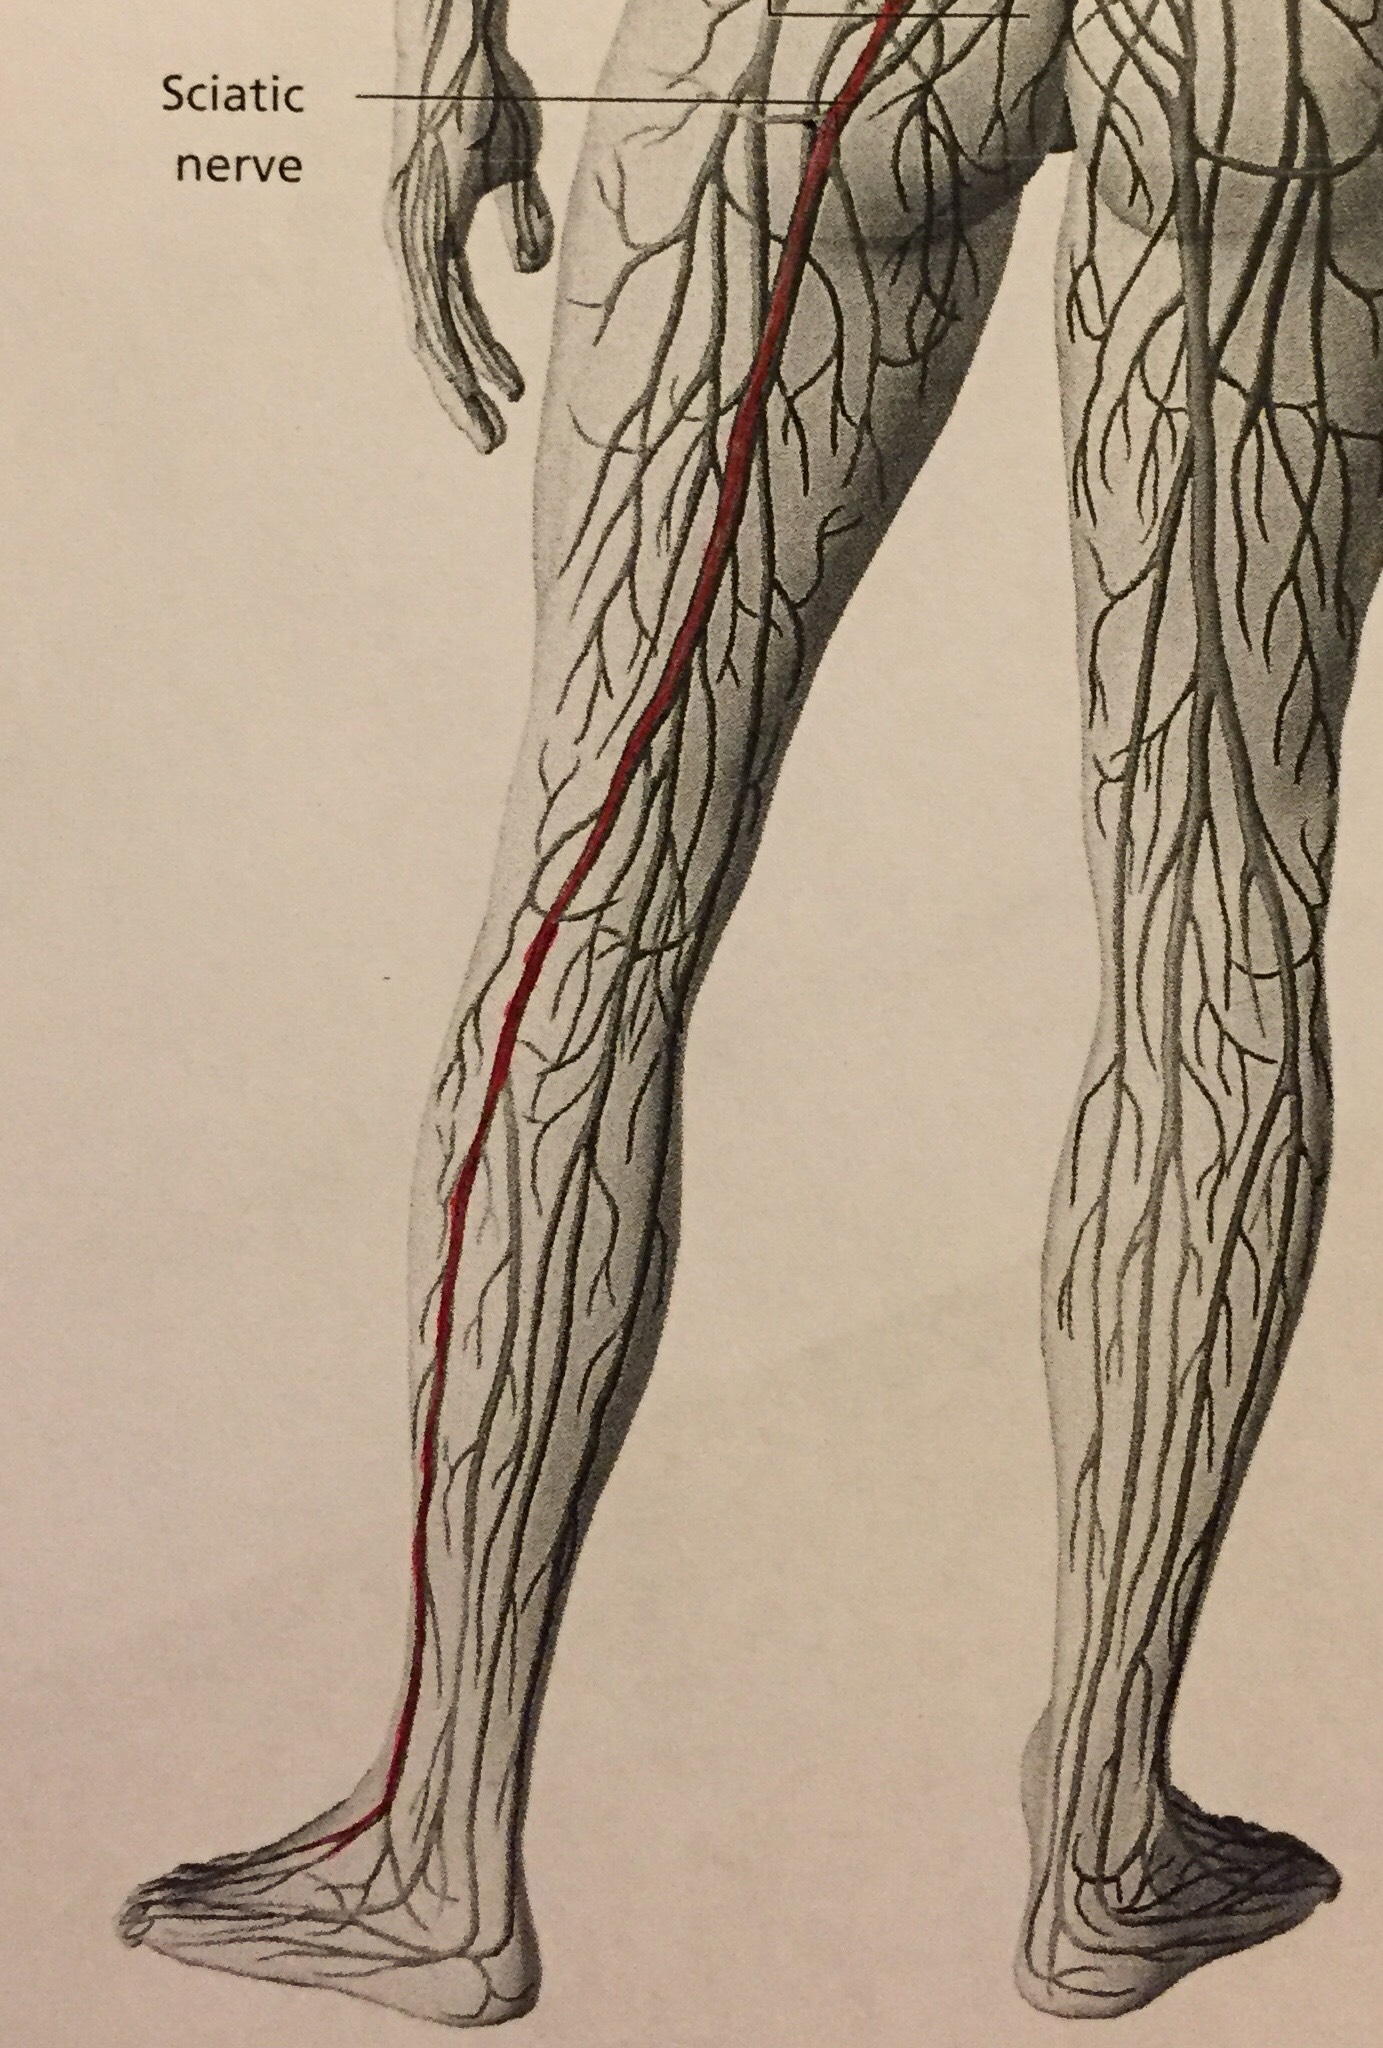 A black and white line drawing of the back of the legs, showing the nerves that travel along the back of the legs, with the sciatic nerve shown in red.